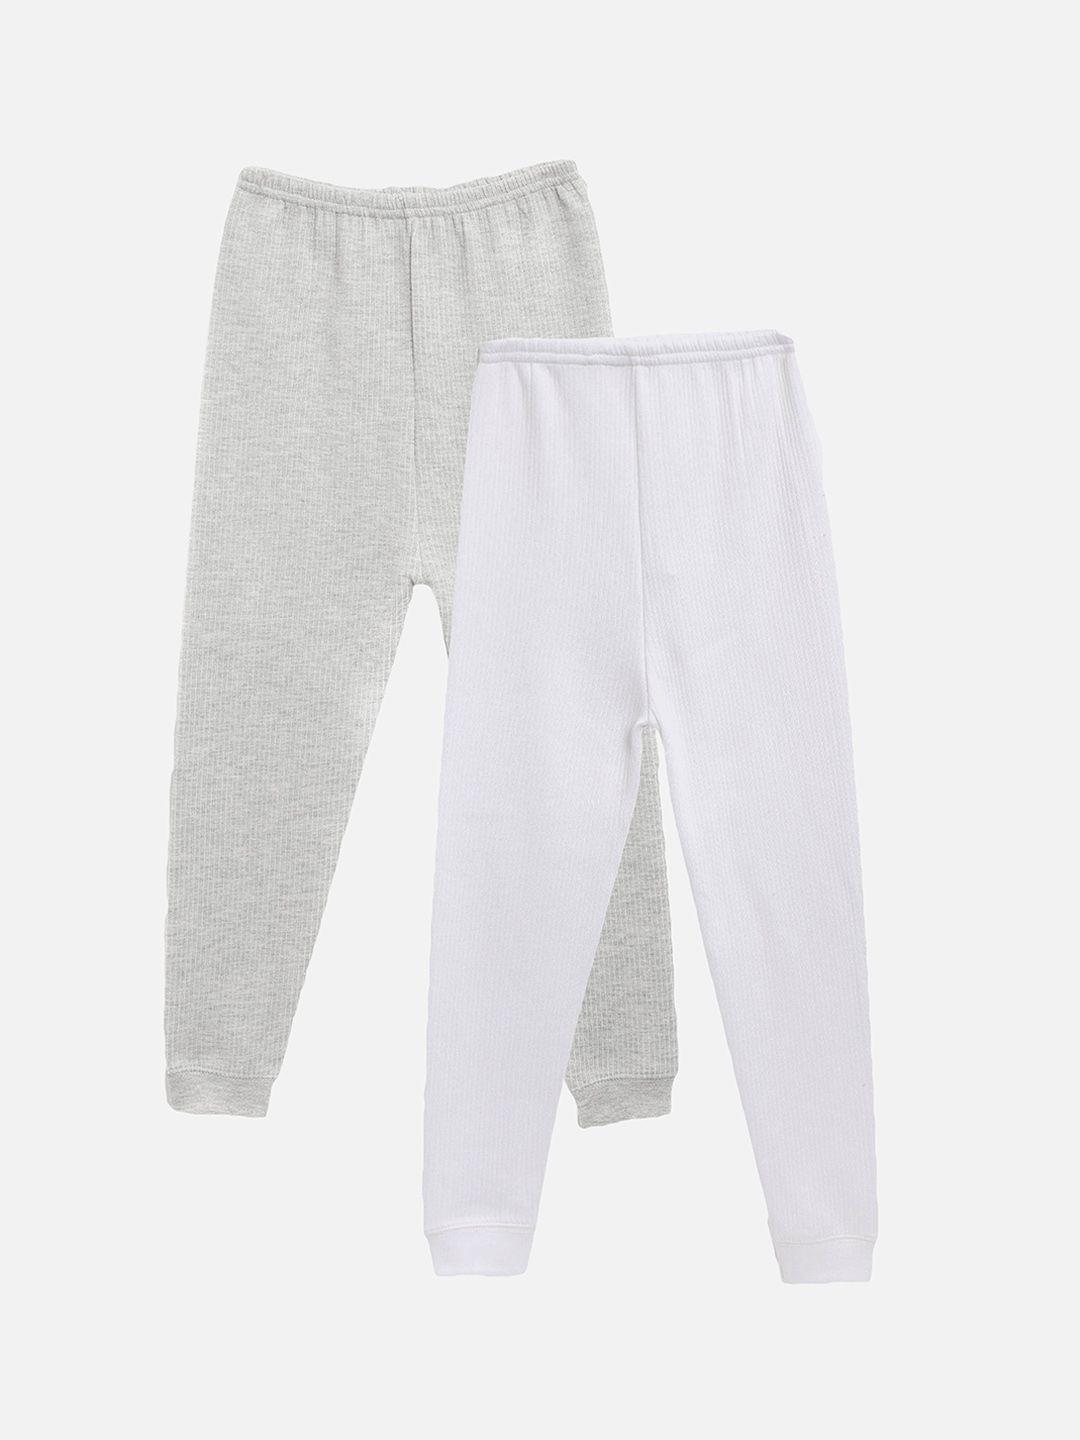 kanvin-boys-pack-of-2-white-and-grey-melange-thermal-bottoms